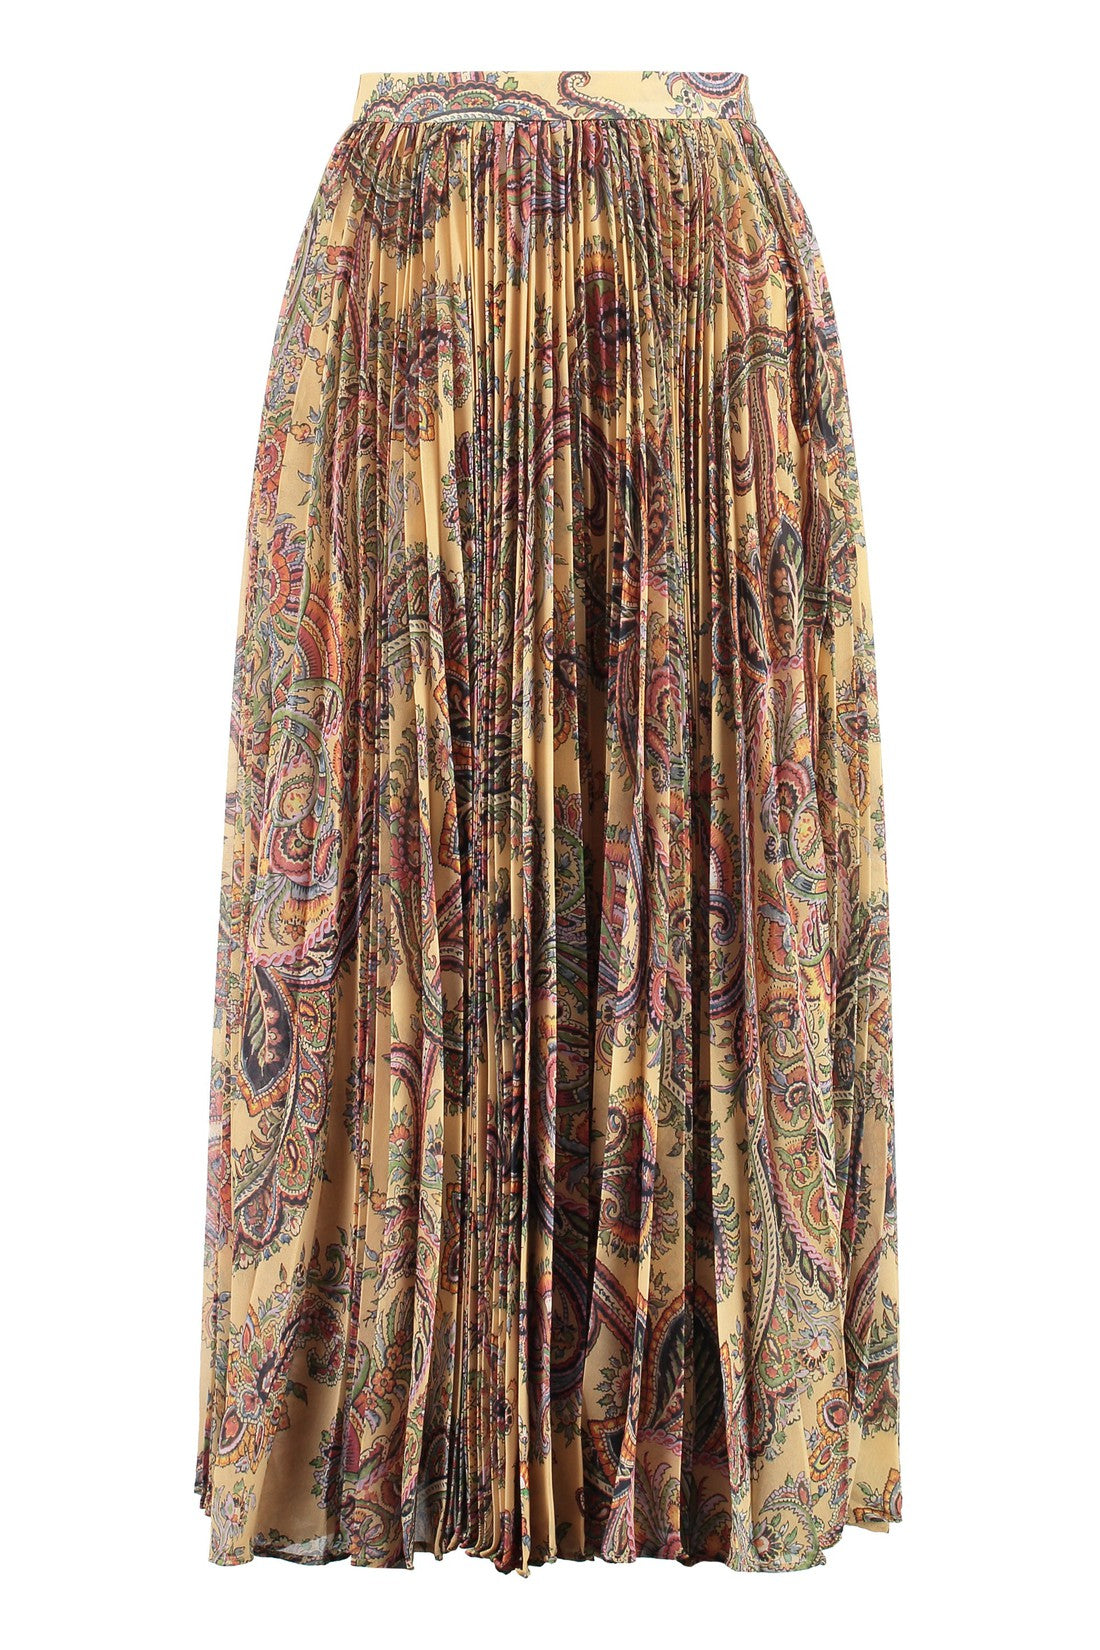 Etro-OUTLET-SALE-Printed pleated skirt-ARCHIVIST